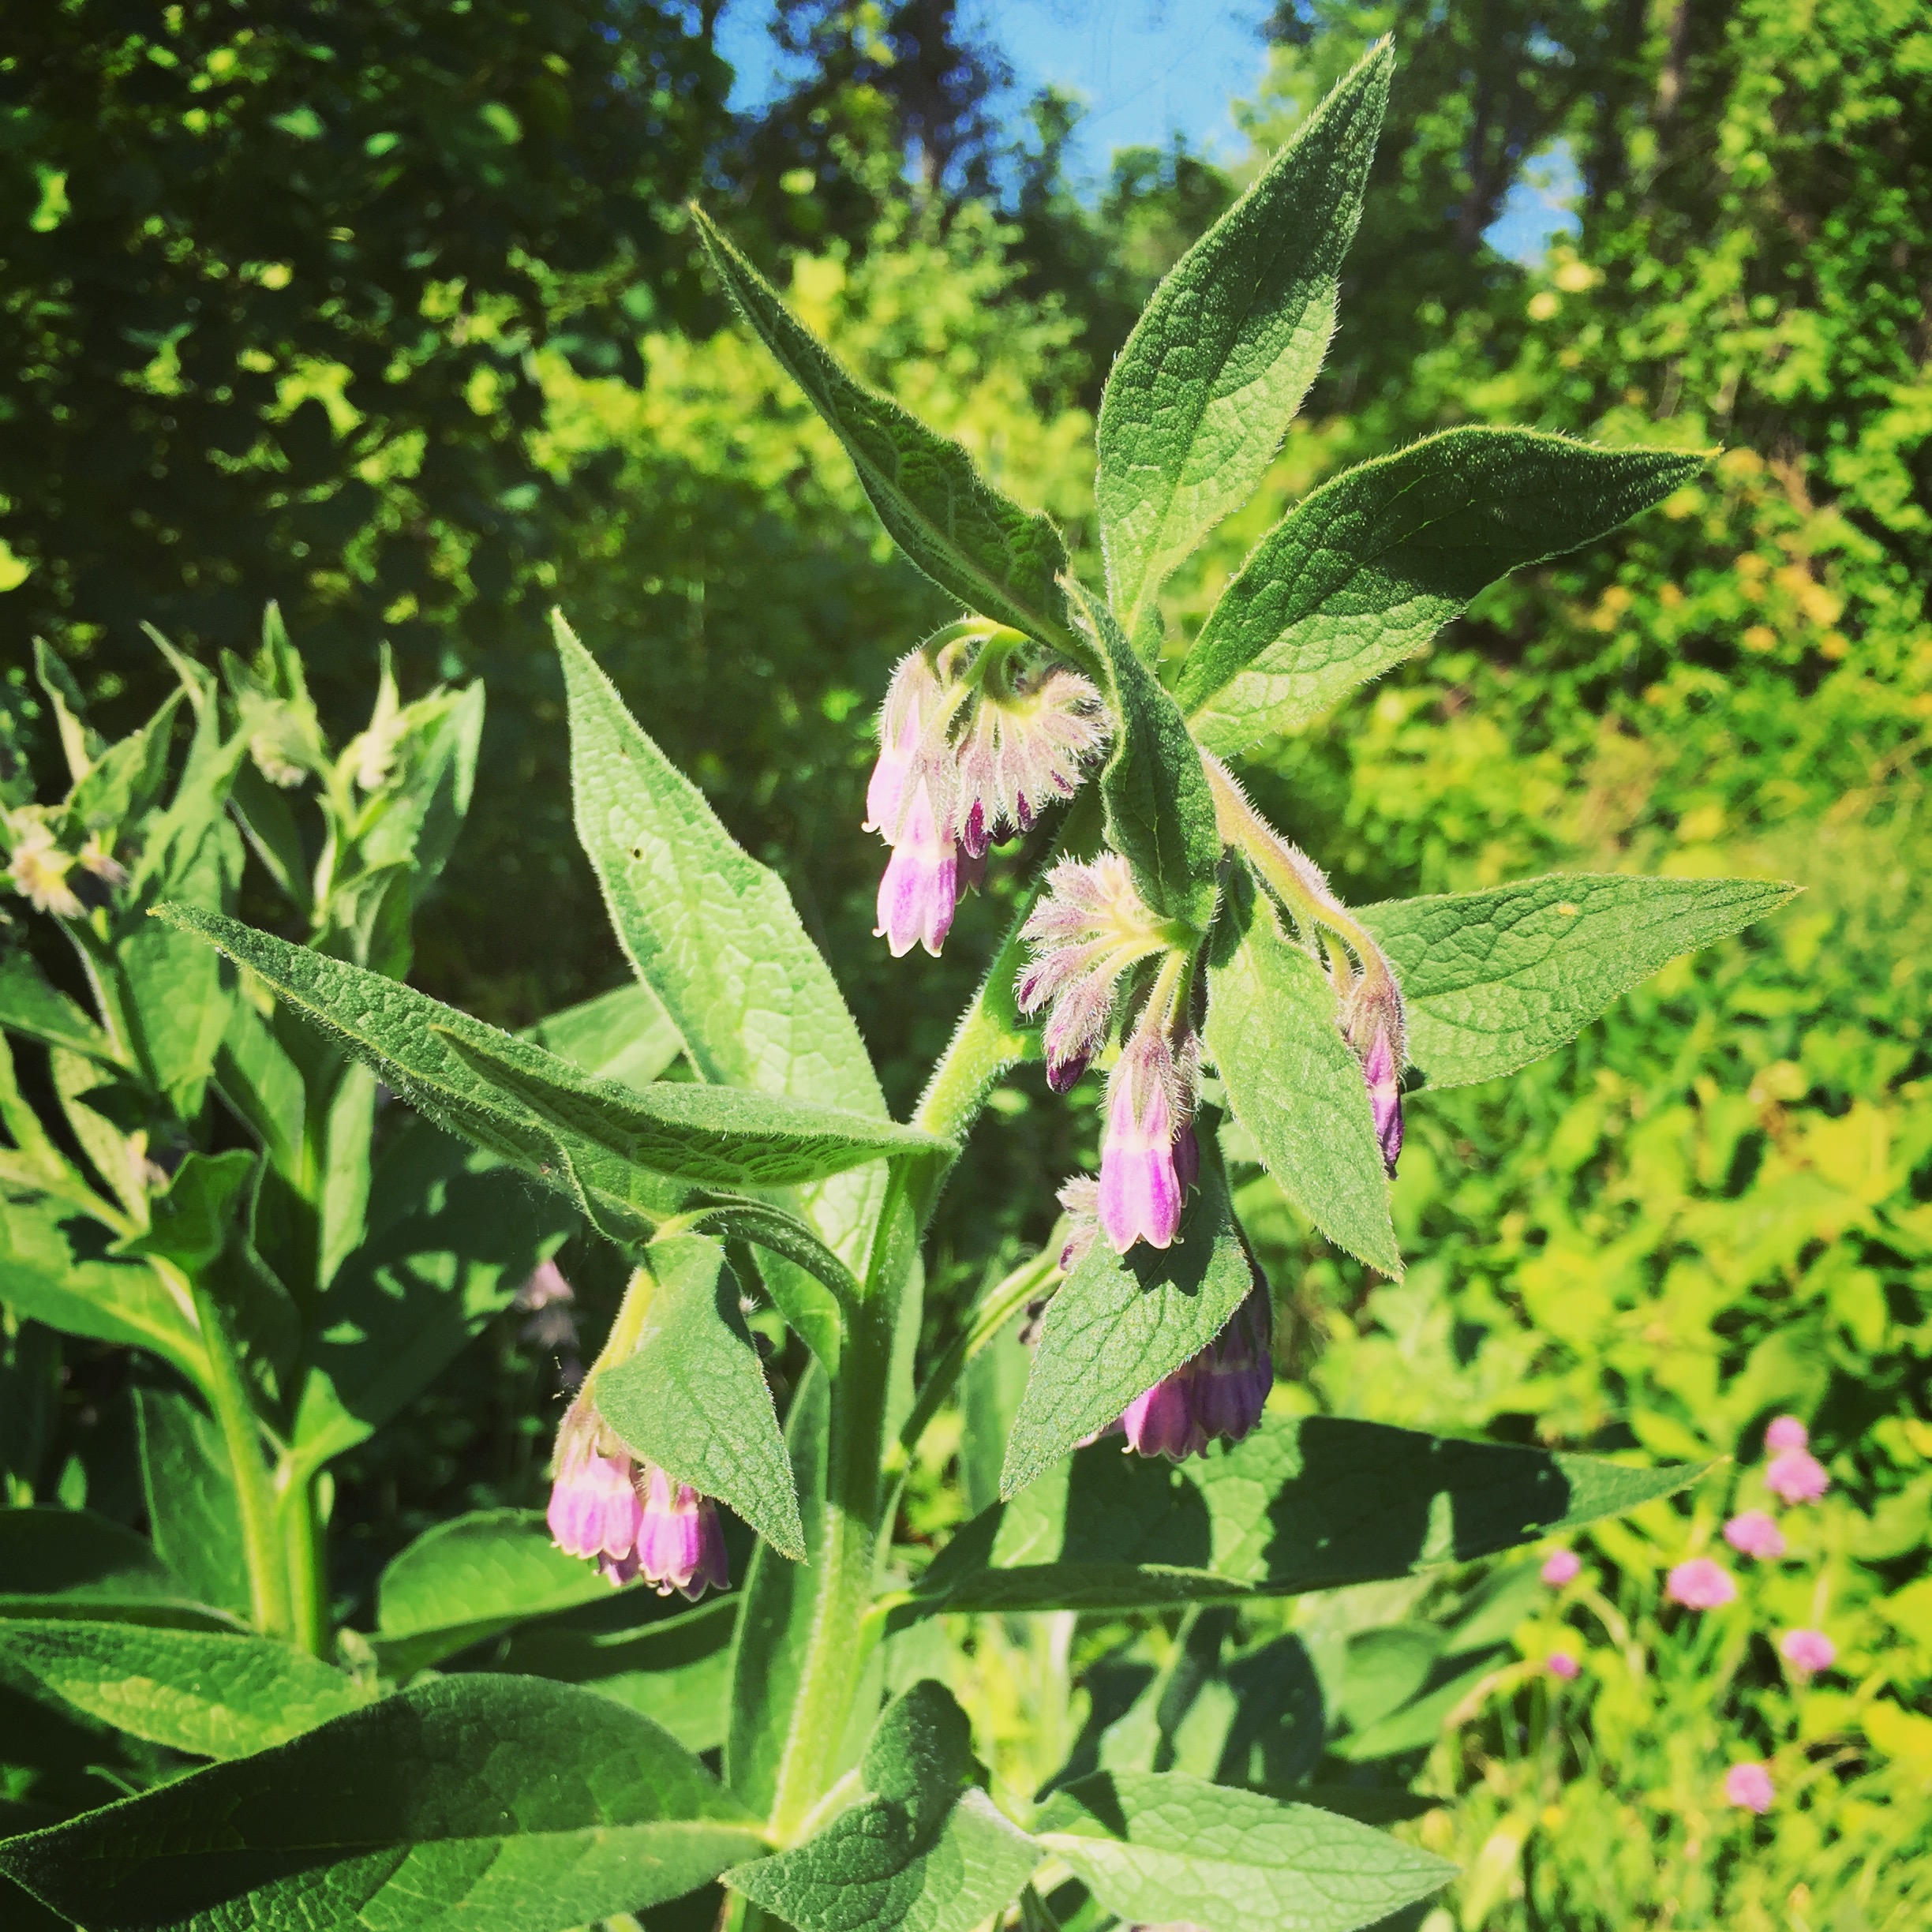  First bloom on the comfrey, with first harvest coming on Monday. Comfrey is a wonderful, healing herb for your skin and features in Half Wild  Green Wonder Salve  - perfect for working hands and troubled skin. 